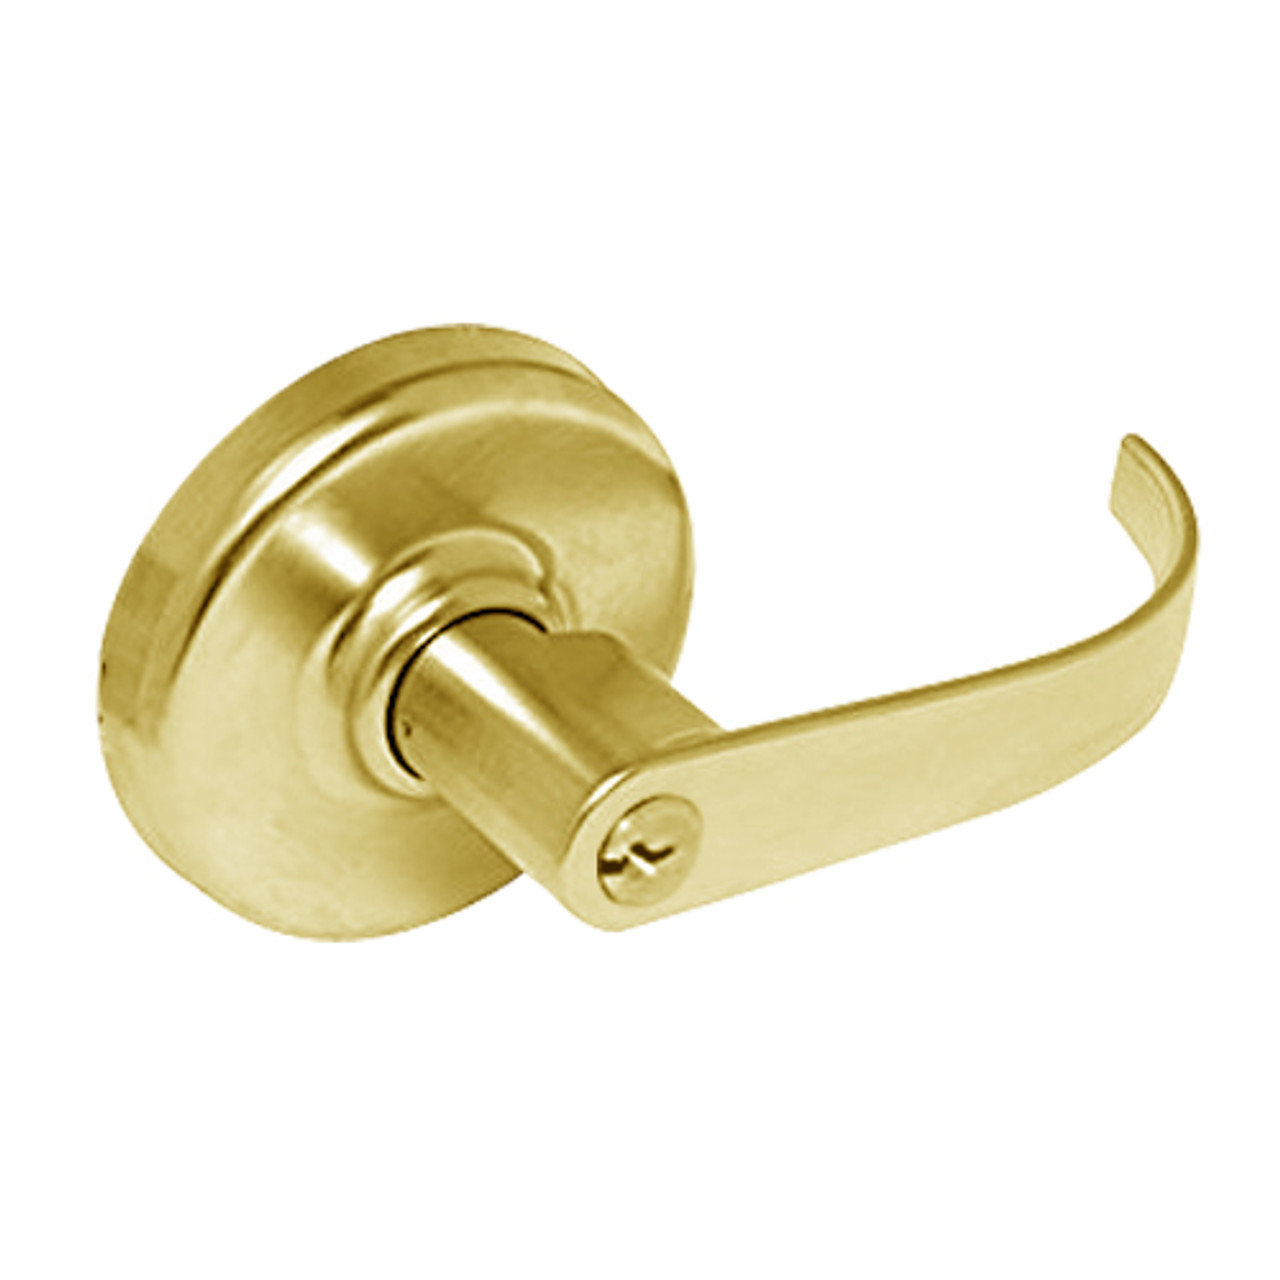 CL3161-PZD-605 Corbin CL3100 Series Vandal Resistant Entrance Cylindrical Locksets with Princeton Lever in Bright Brass Finish